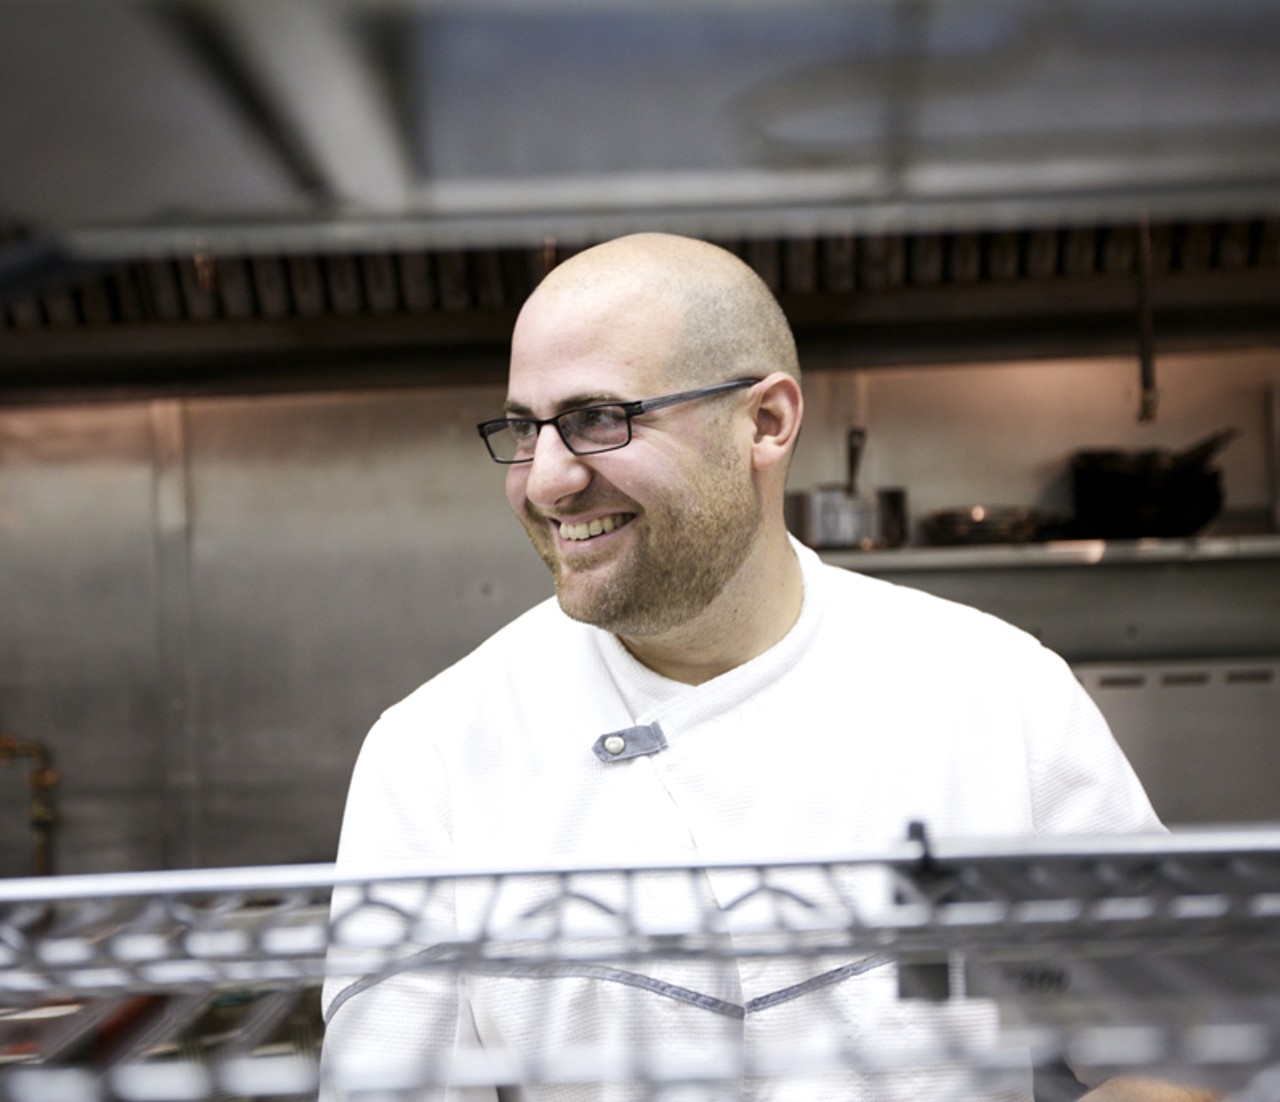 Owner and chef of Mad Tomato, Vito Racanelli.